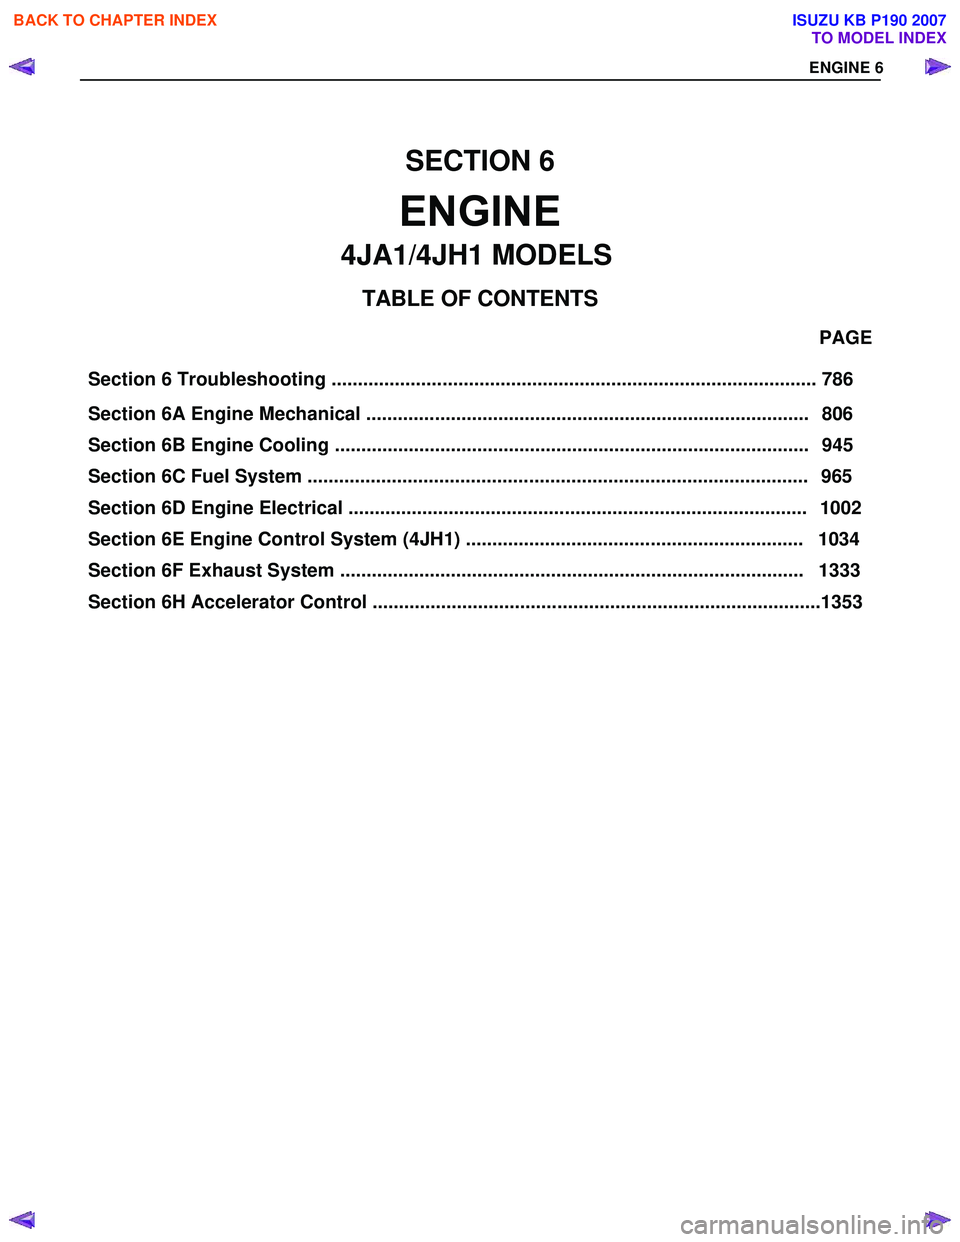 ISUZU KB P190 2007  Workshop Repair Manual Section 6 Troubleshooting ....................................................................................... ..... 786
                                                                     PAGE 
S